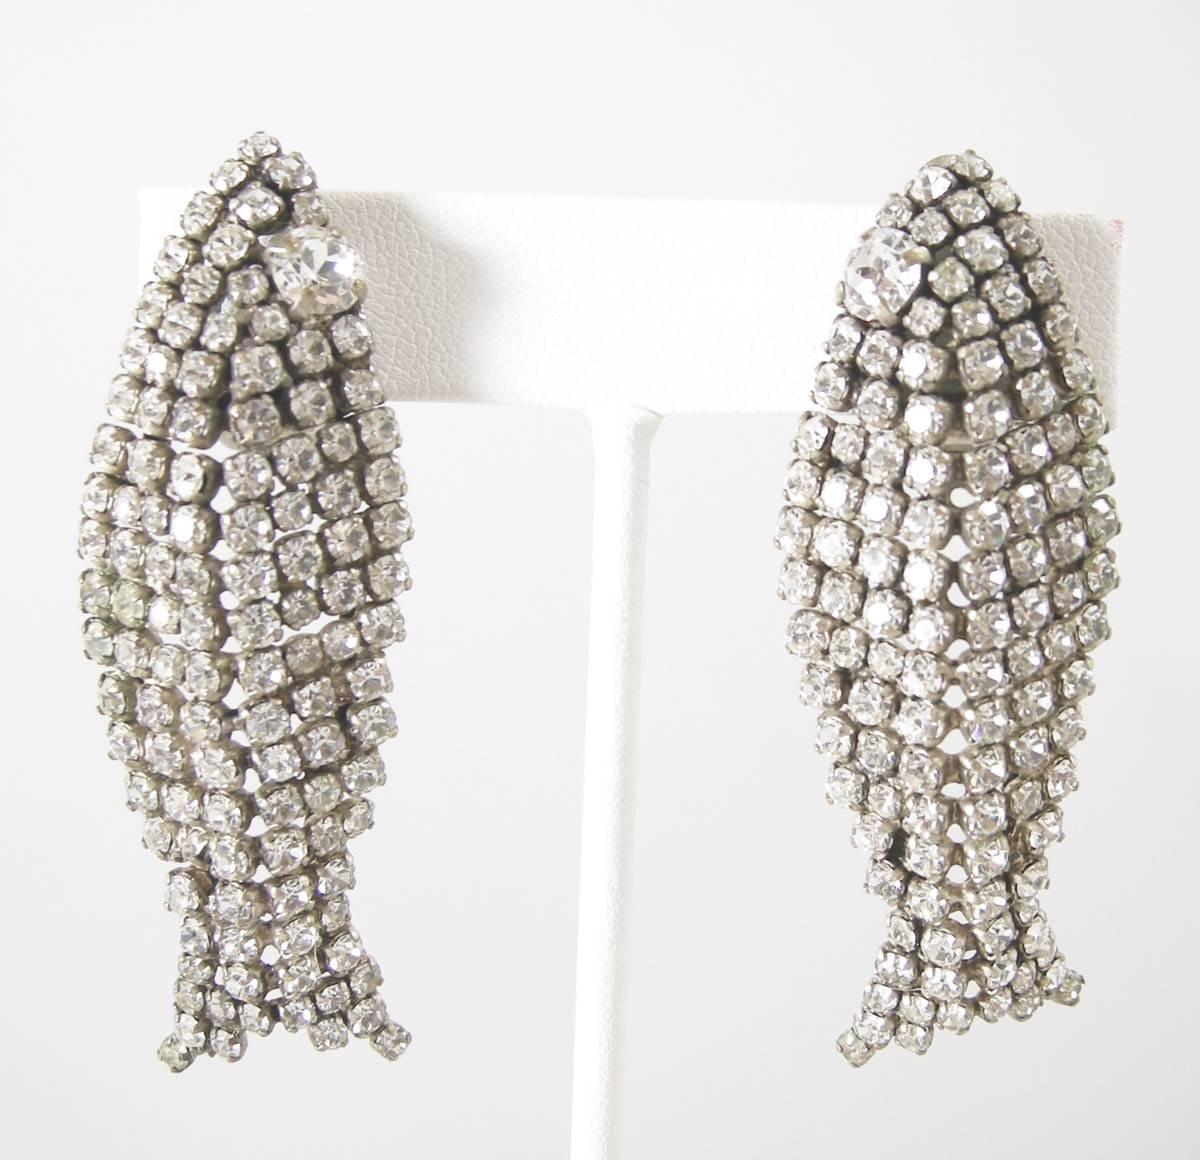 I love these 50s fish earrings with clear rhinestone accents in a silver tone metal setting.  These clip earrings measure 2-1/2” x 3/4” and are in excellent condition.
